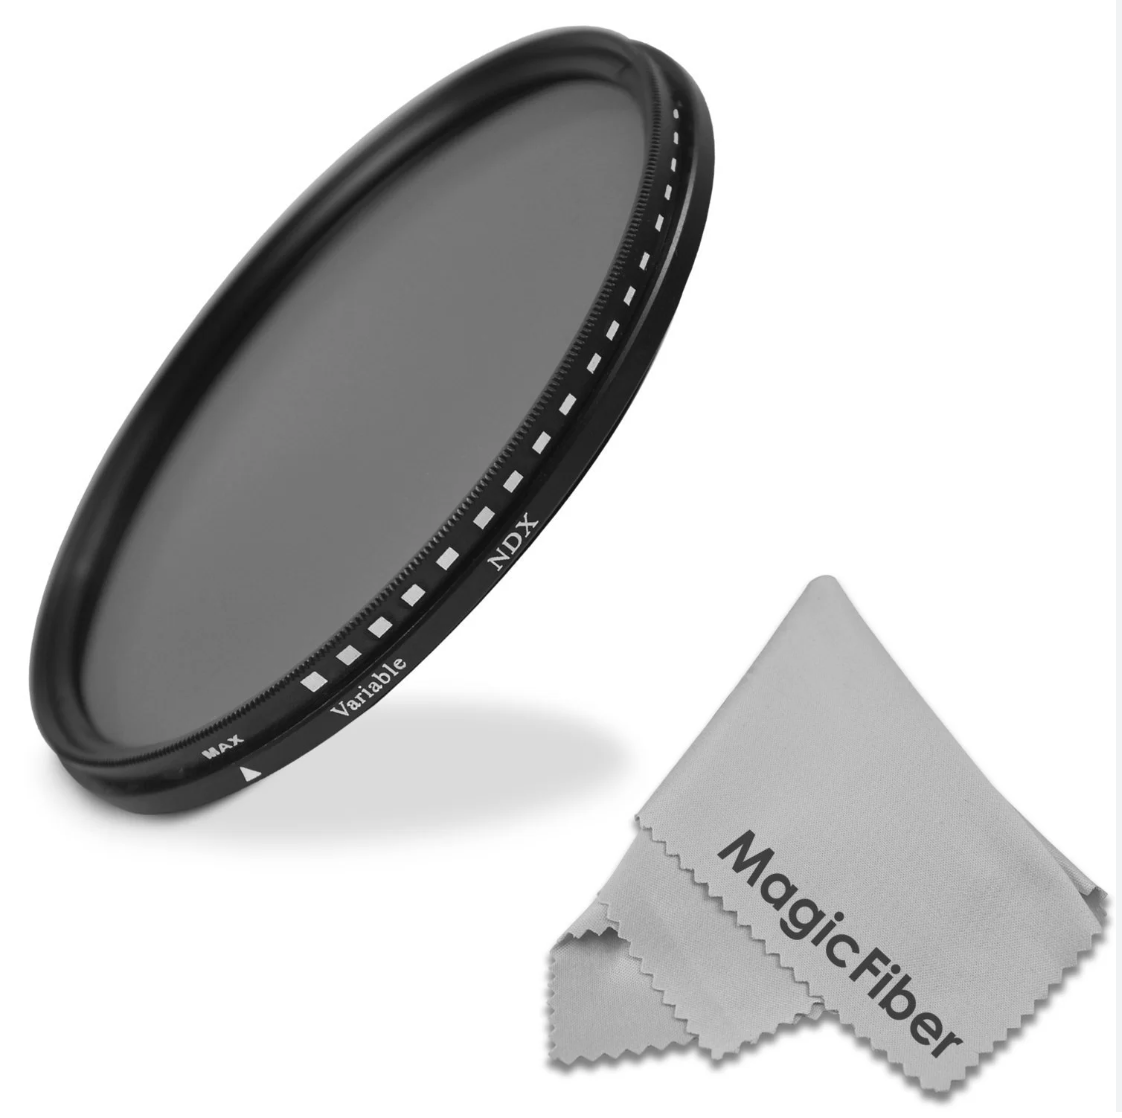 77mm Variable Neutral Density (VND) Filter - 2 to 8 Stops